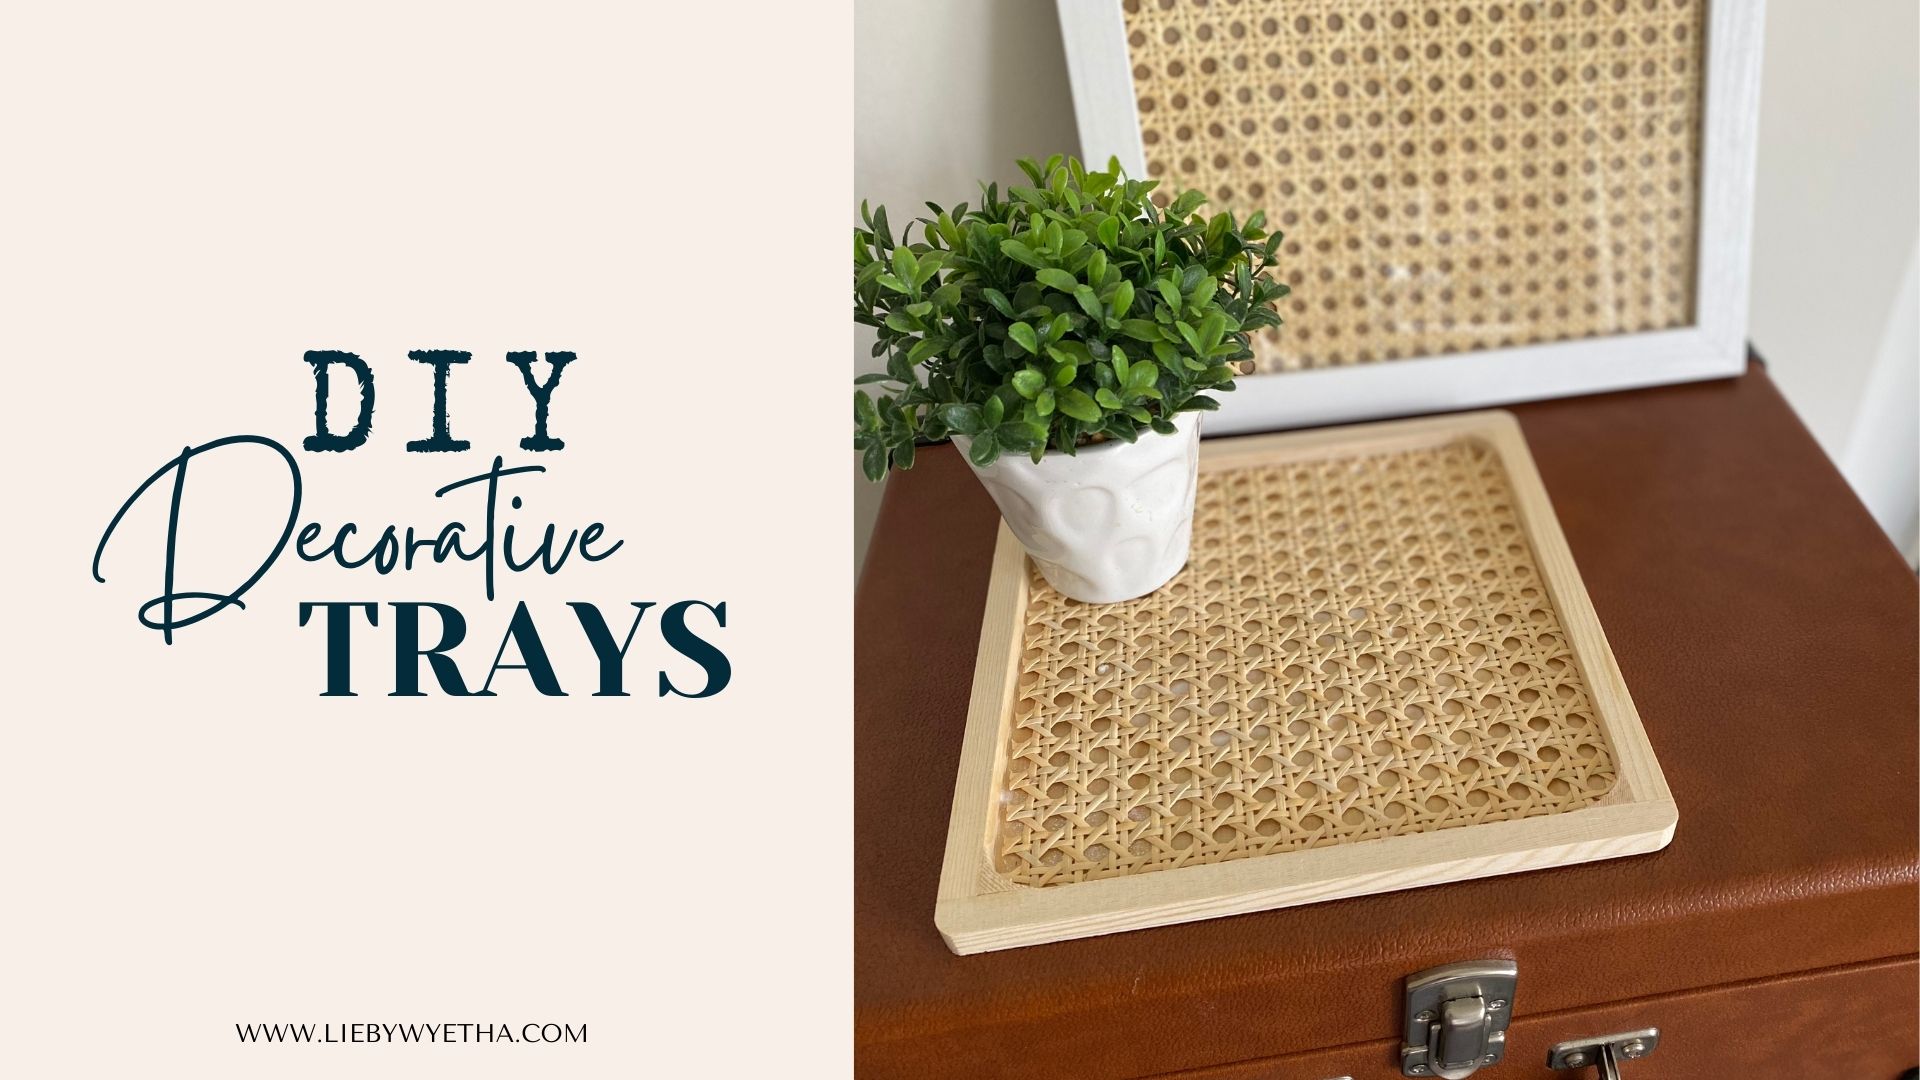 DIY Decorative Trays Made with Cane Webbing!